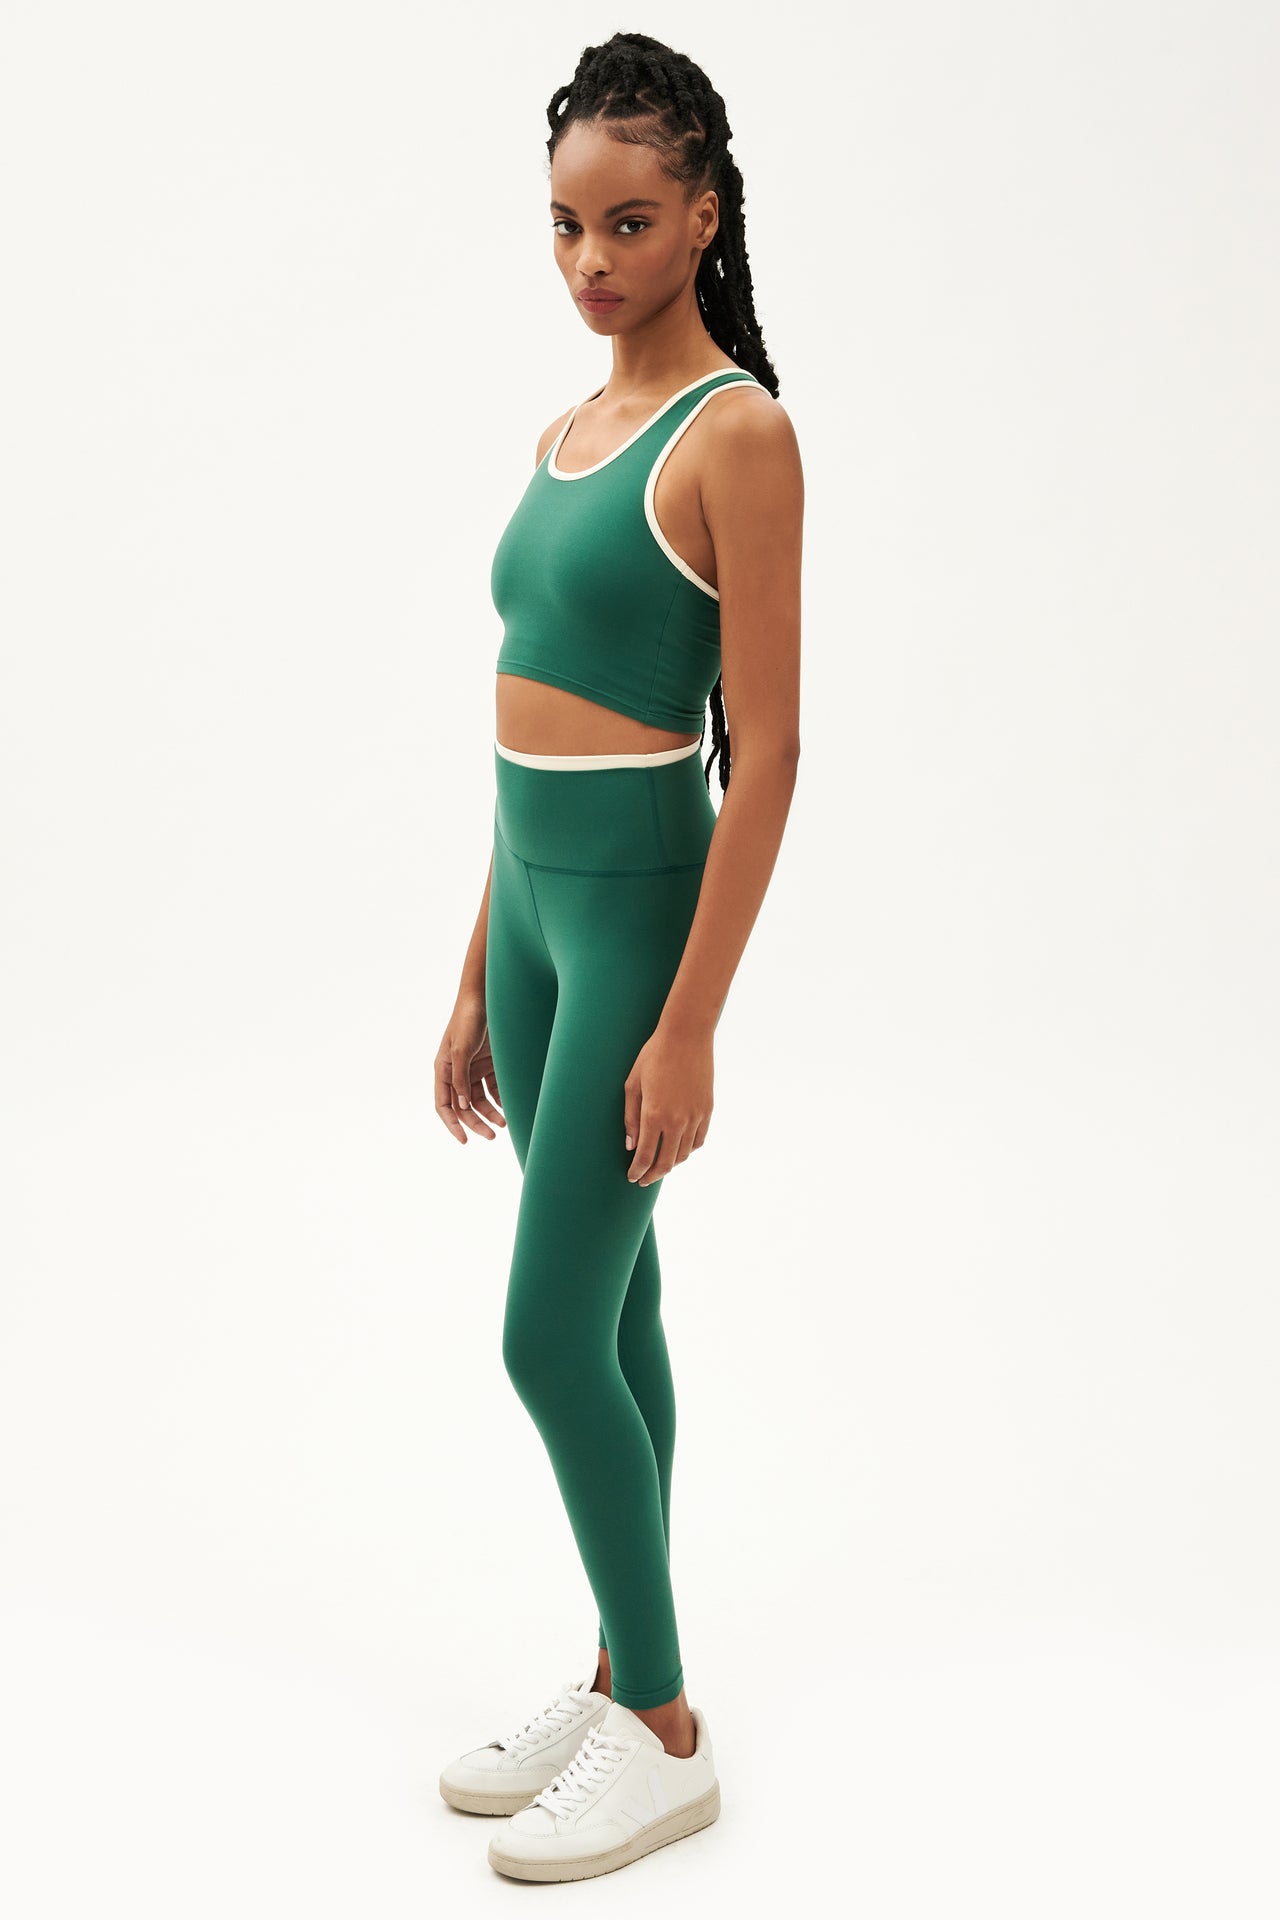 Full side view of girl wearing green leggings with thin white band around waist and green tank top with white shoes